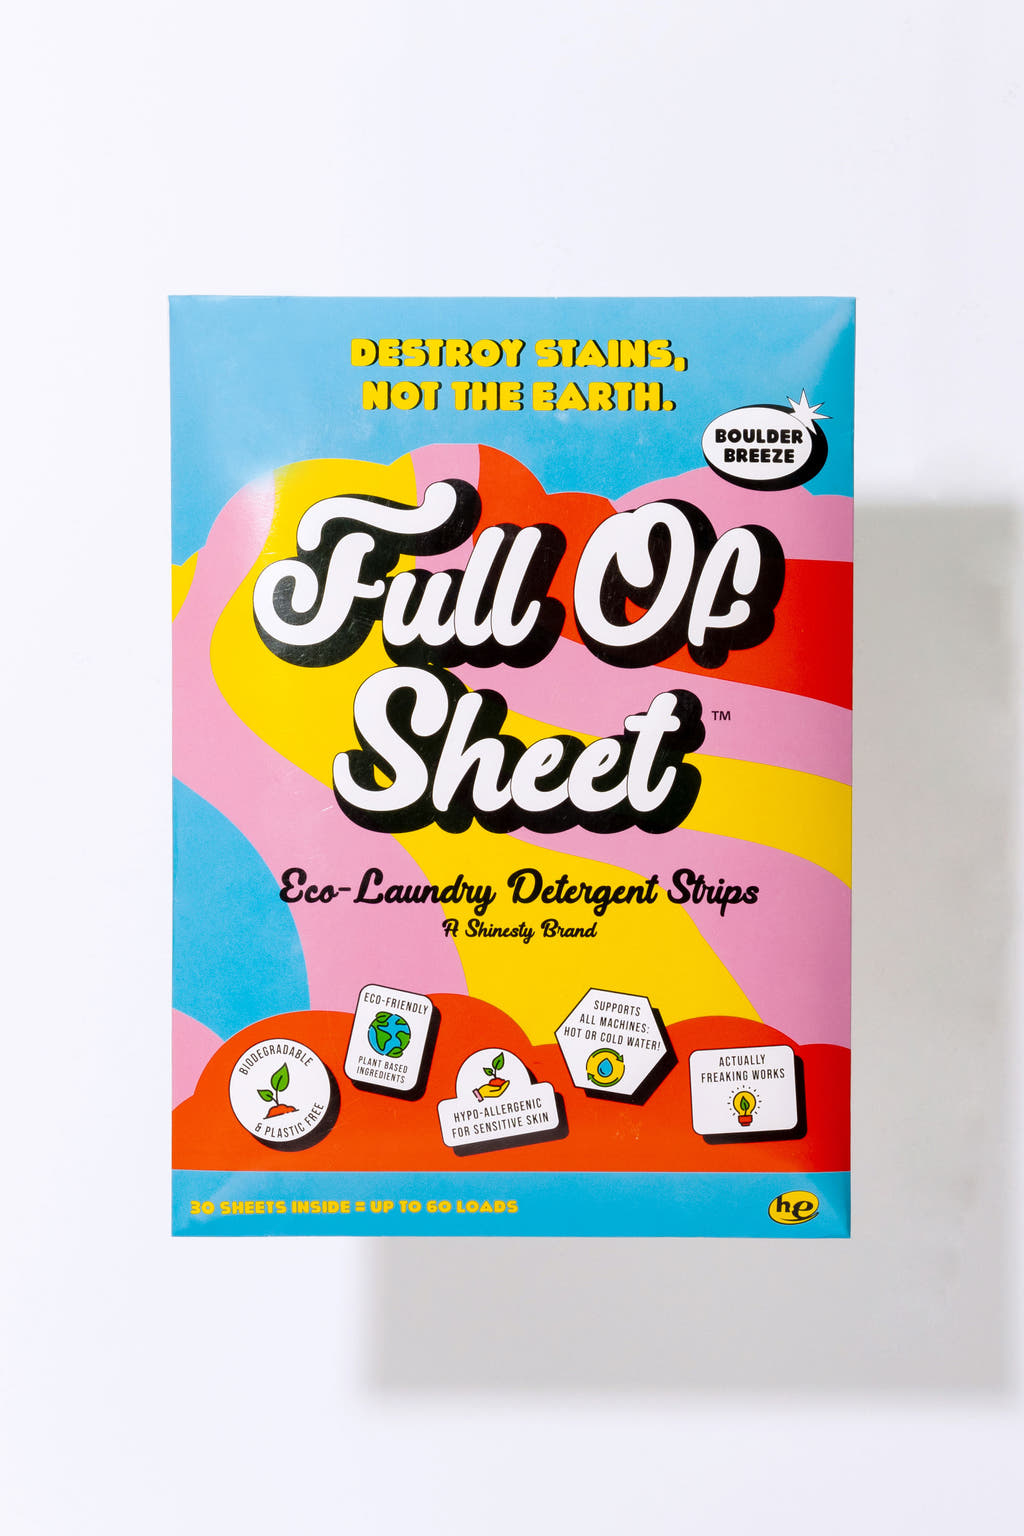 The Full Of Sheet | Boulder Breeze Eco-Laundry Detergent Strips